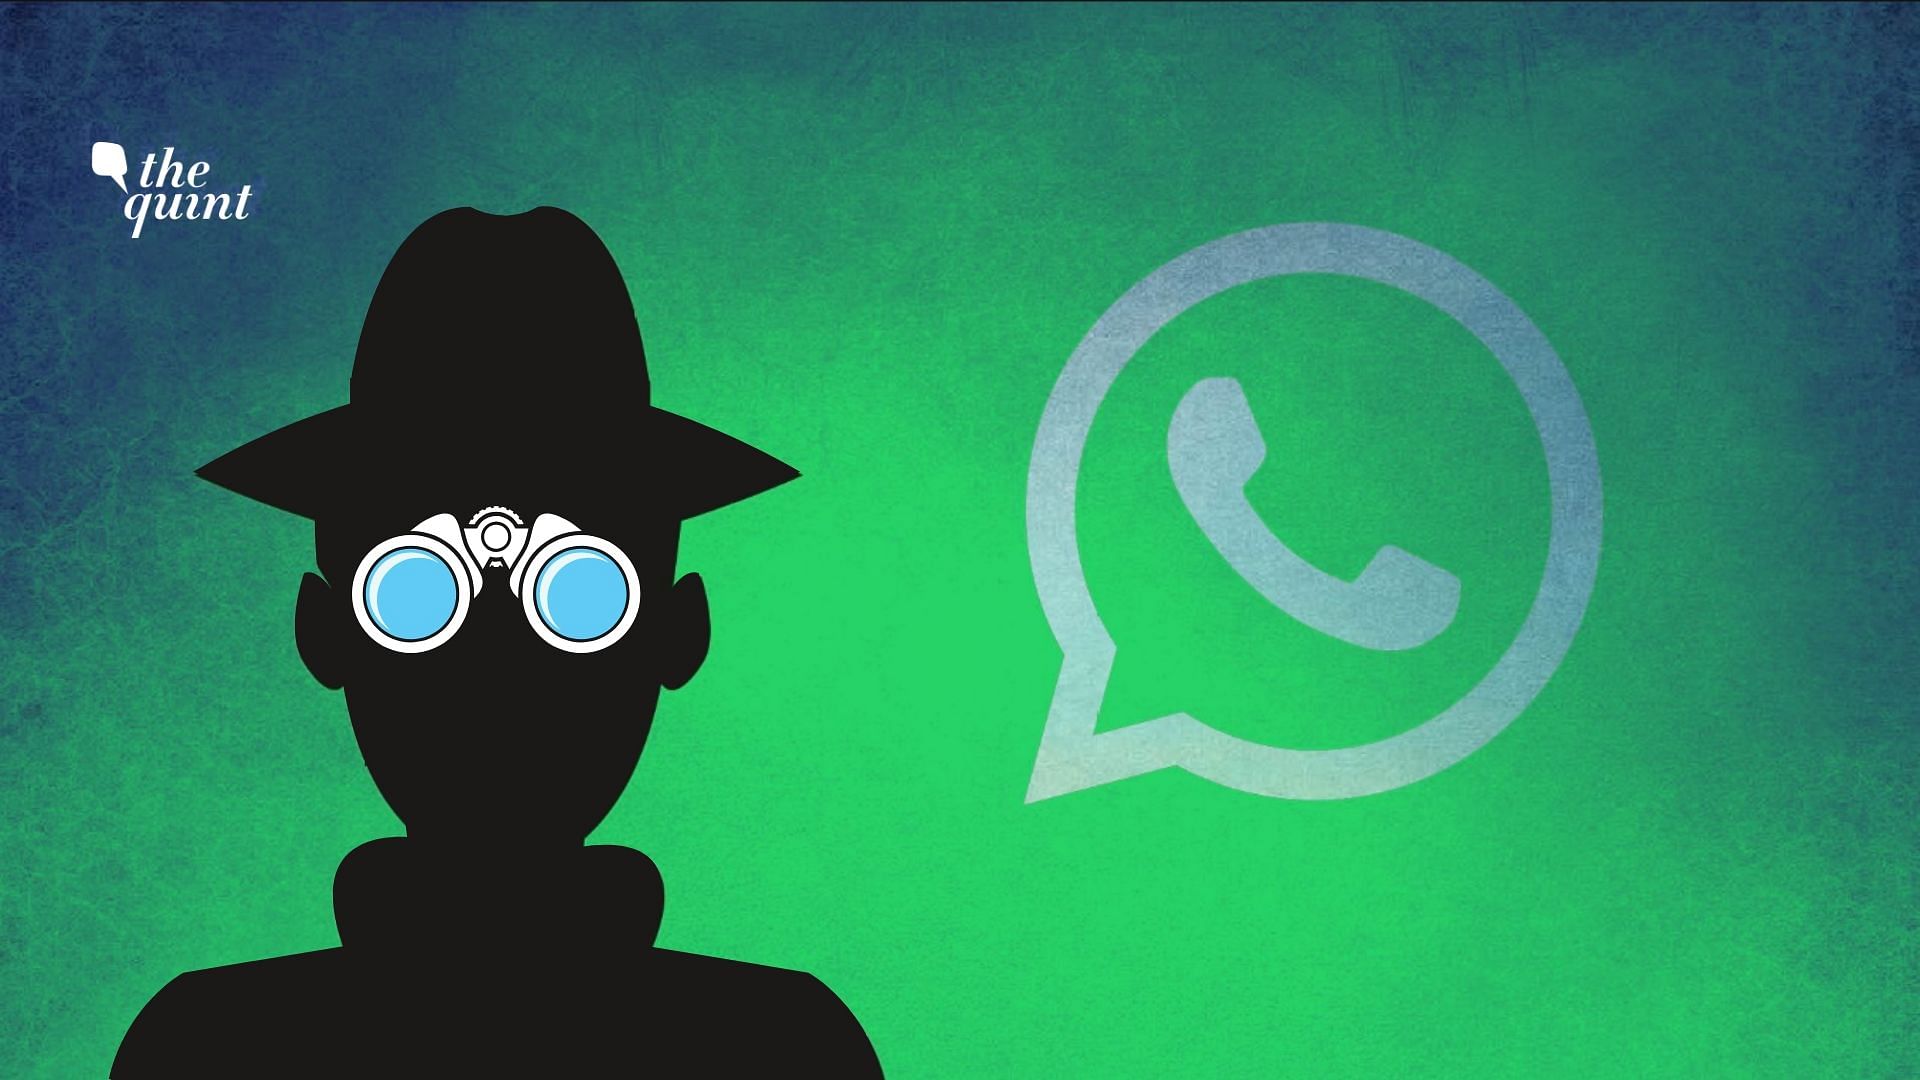 Full List of People Targetted in Whatsapp Breach: Several activists and journalists came forward to confirm that they were informed of the attack by WhatsApp.